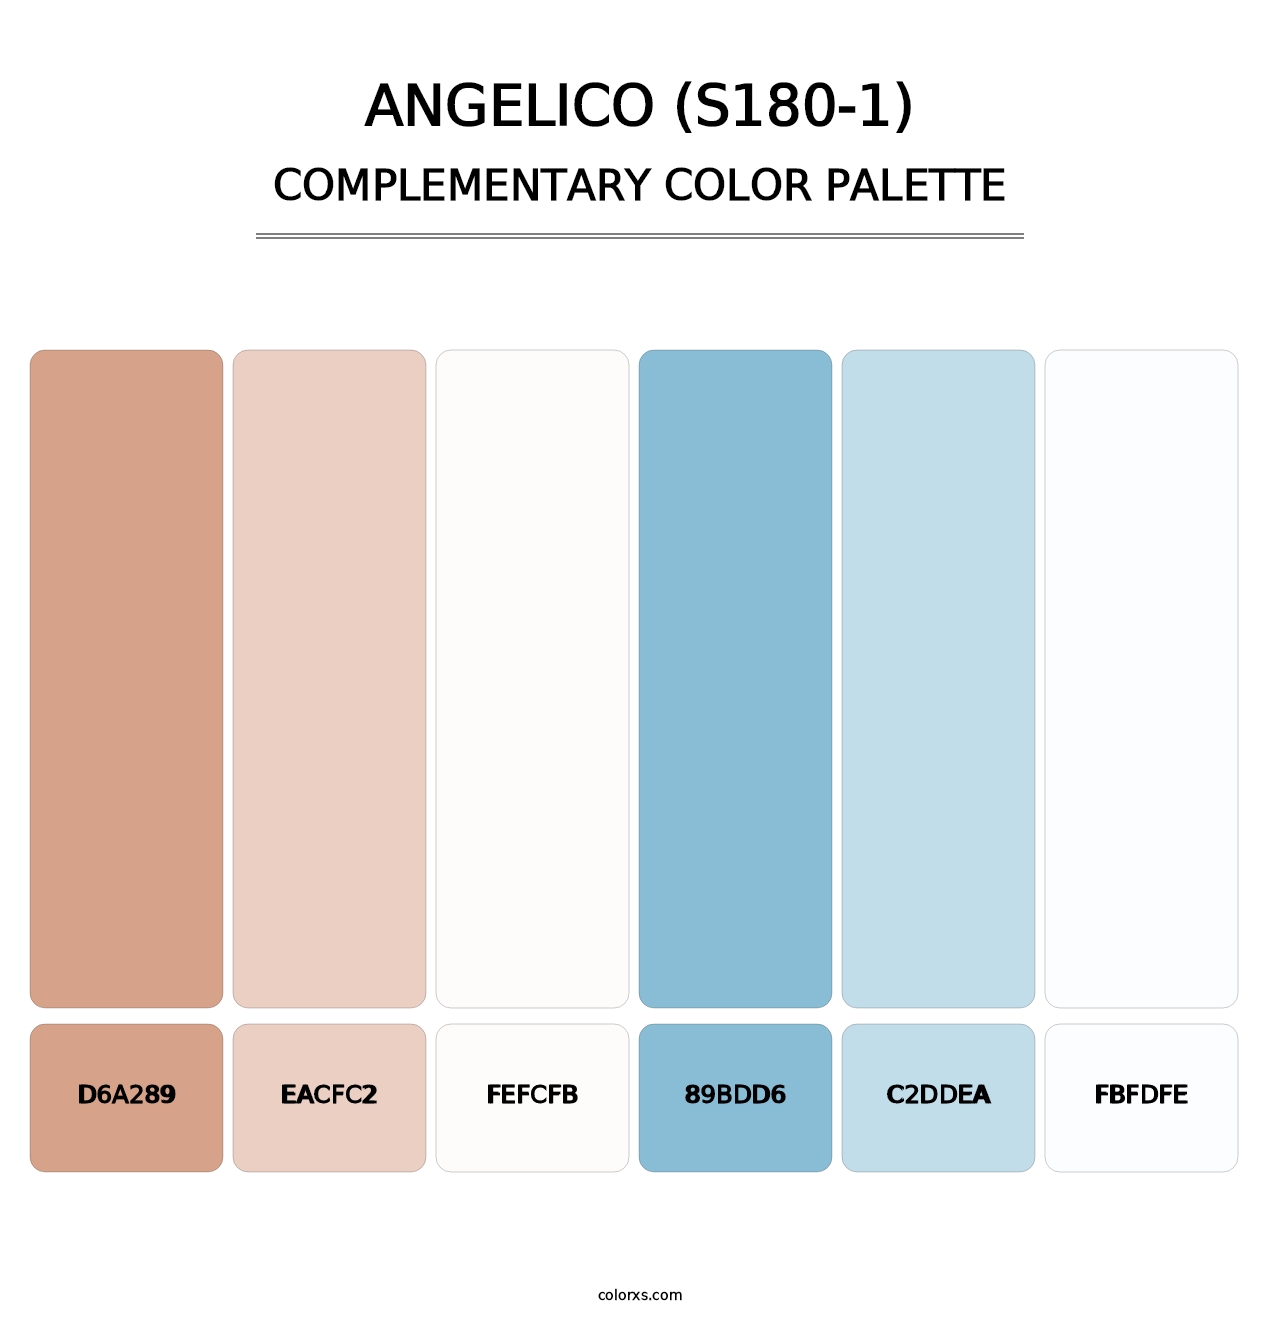 Angelico (S180-1) - Complementary Color Palette